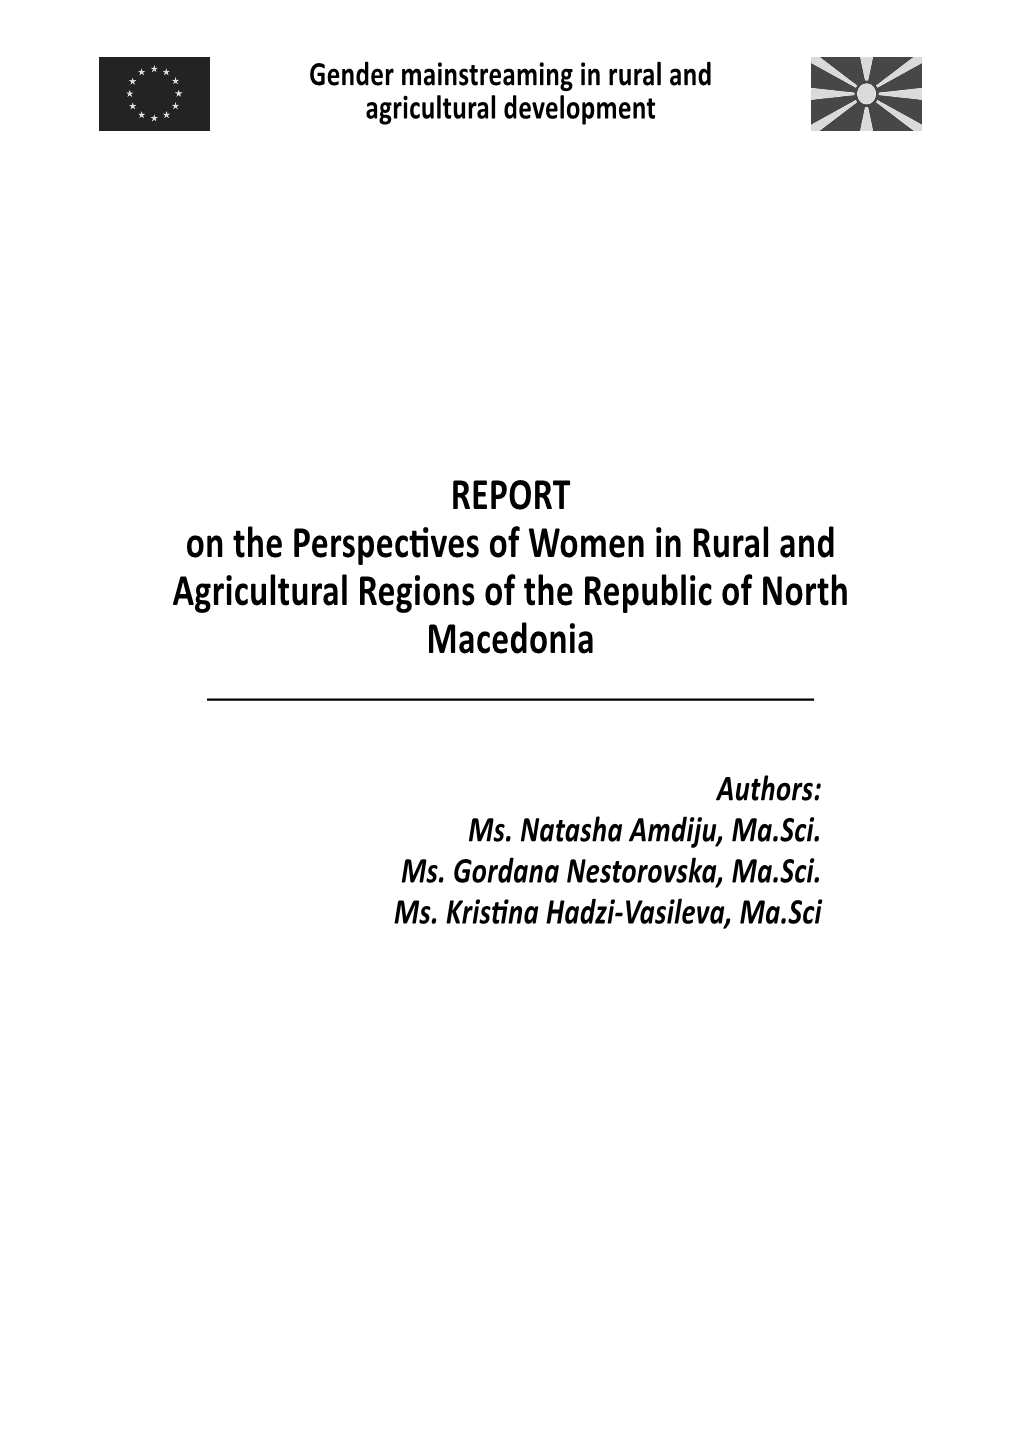 REPORT on the Perspectives of Women in Rural and Agricultural Regions of the Republic of North Macedonia